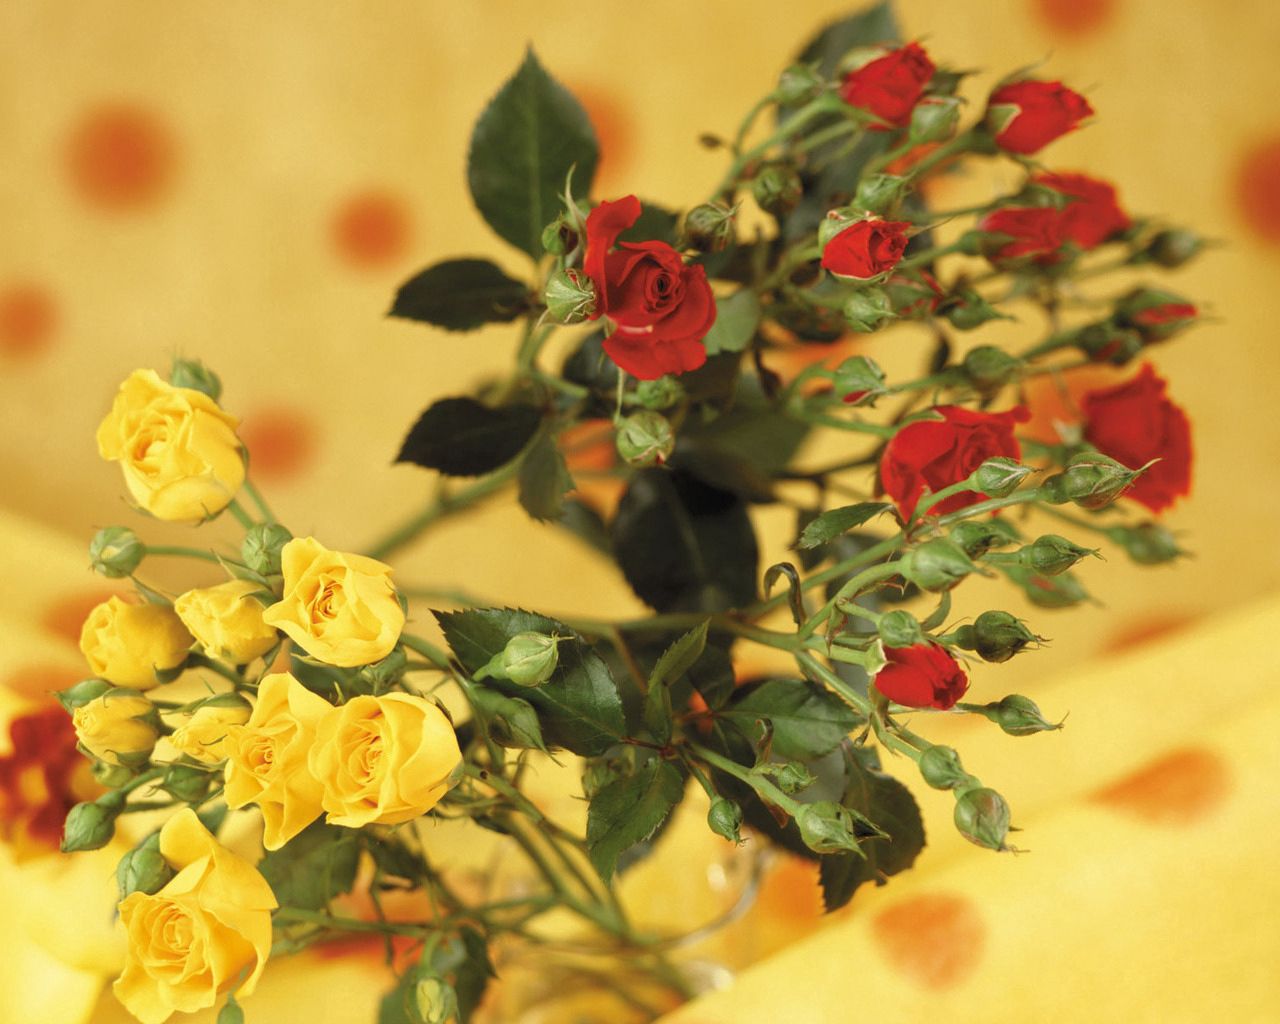 roses, flowers, bush, yellow, red, blur, smooth, bushes